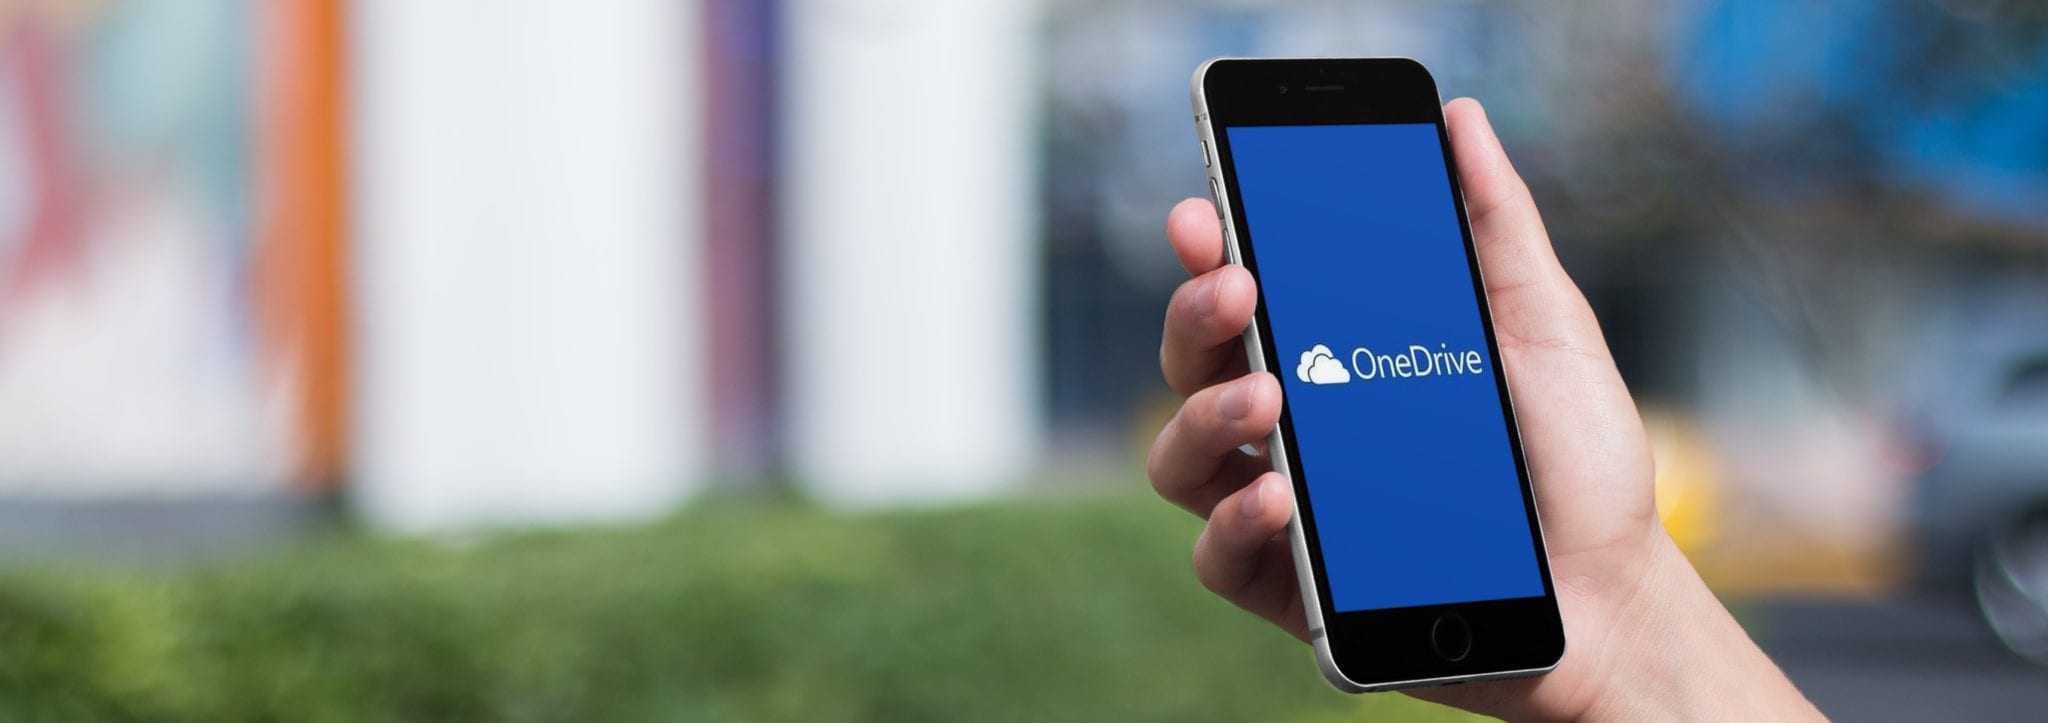 microsoft-rolling-out-mobile-push-notifications-for-onedrive-for-business-sharepoint.jpg